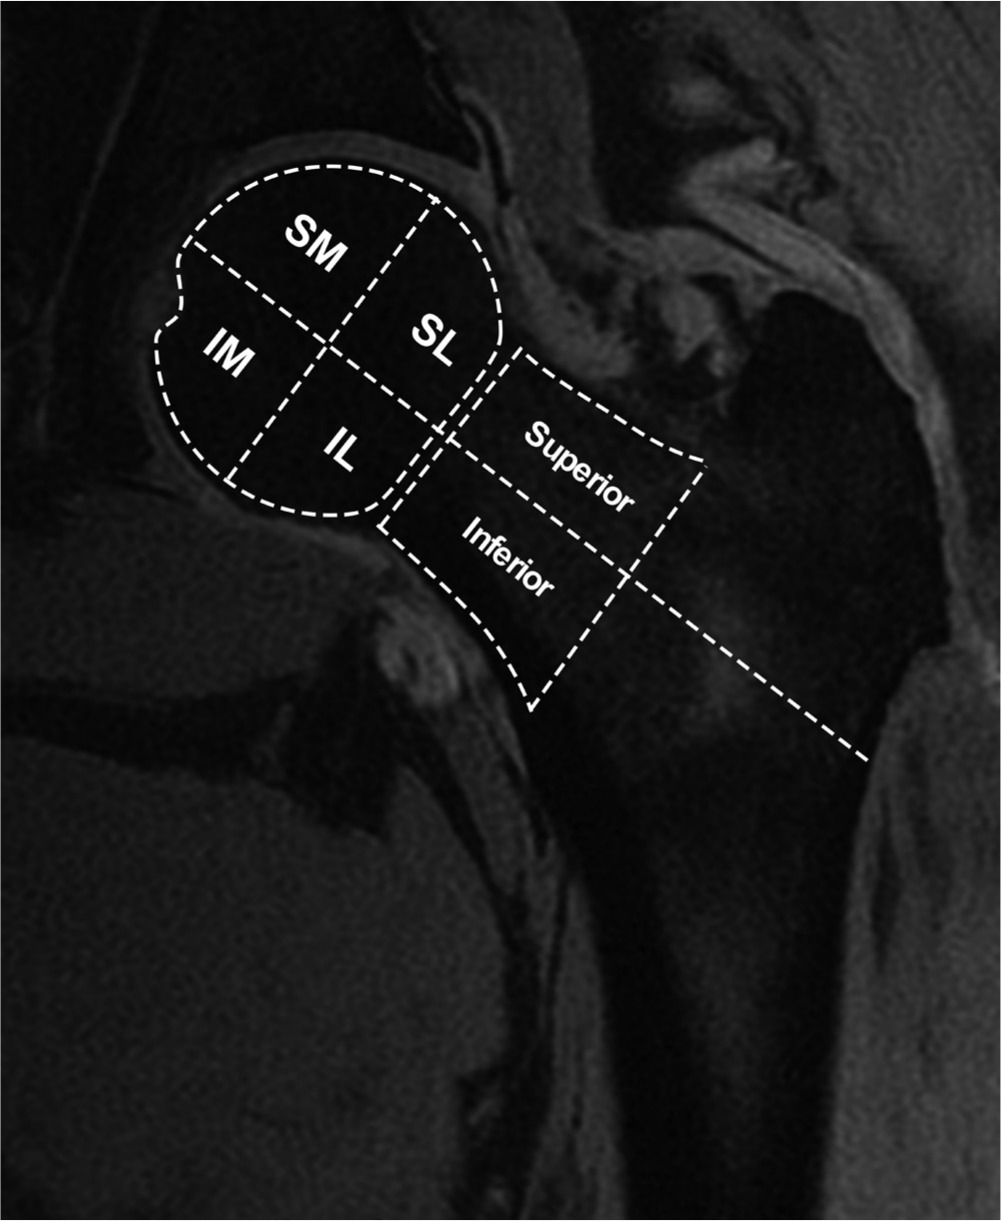 Fig. 2 
            Representative coronal MRI image of left hip demonstrating regions of interest for quantitative MRI analysis. Four regions in the femoral head (superomedial (SM), superolateral (SL), inferomedial (IM), and inferolateral (IL) quadrants) and two regions in the femoral neck (superior and inferior) were evaluated.
          